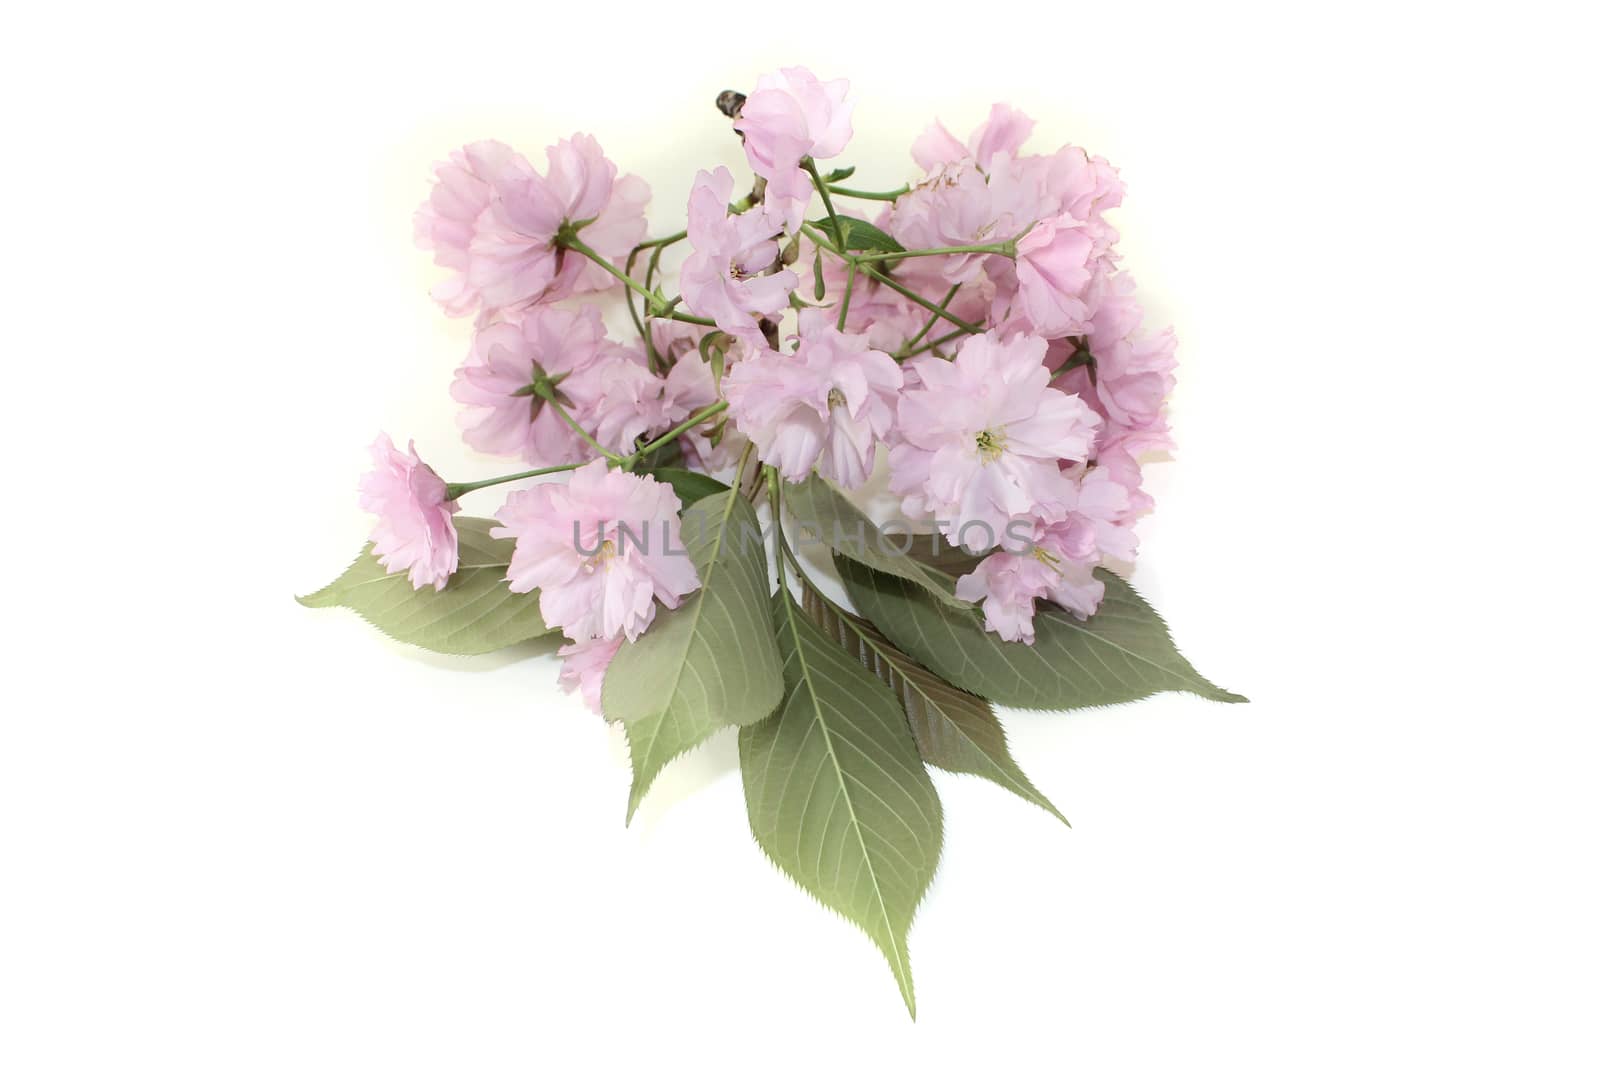 branch of East Asian cherry blossoms on a light background